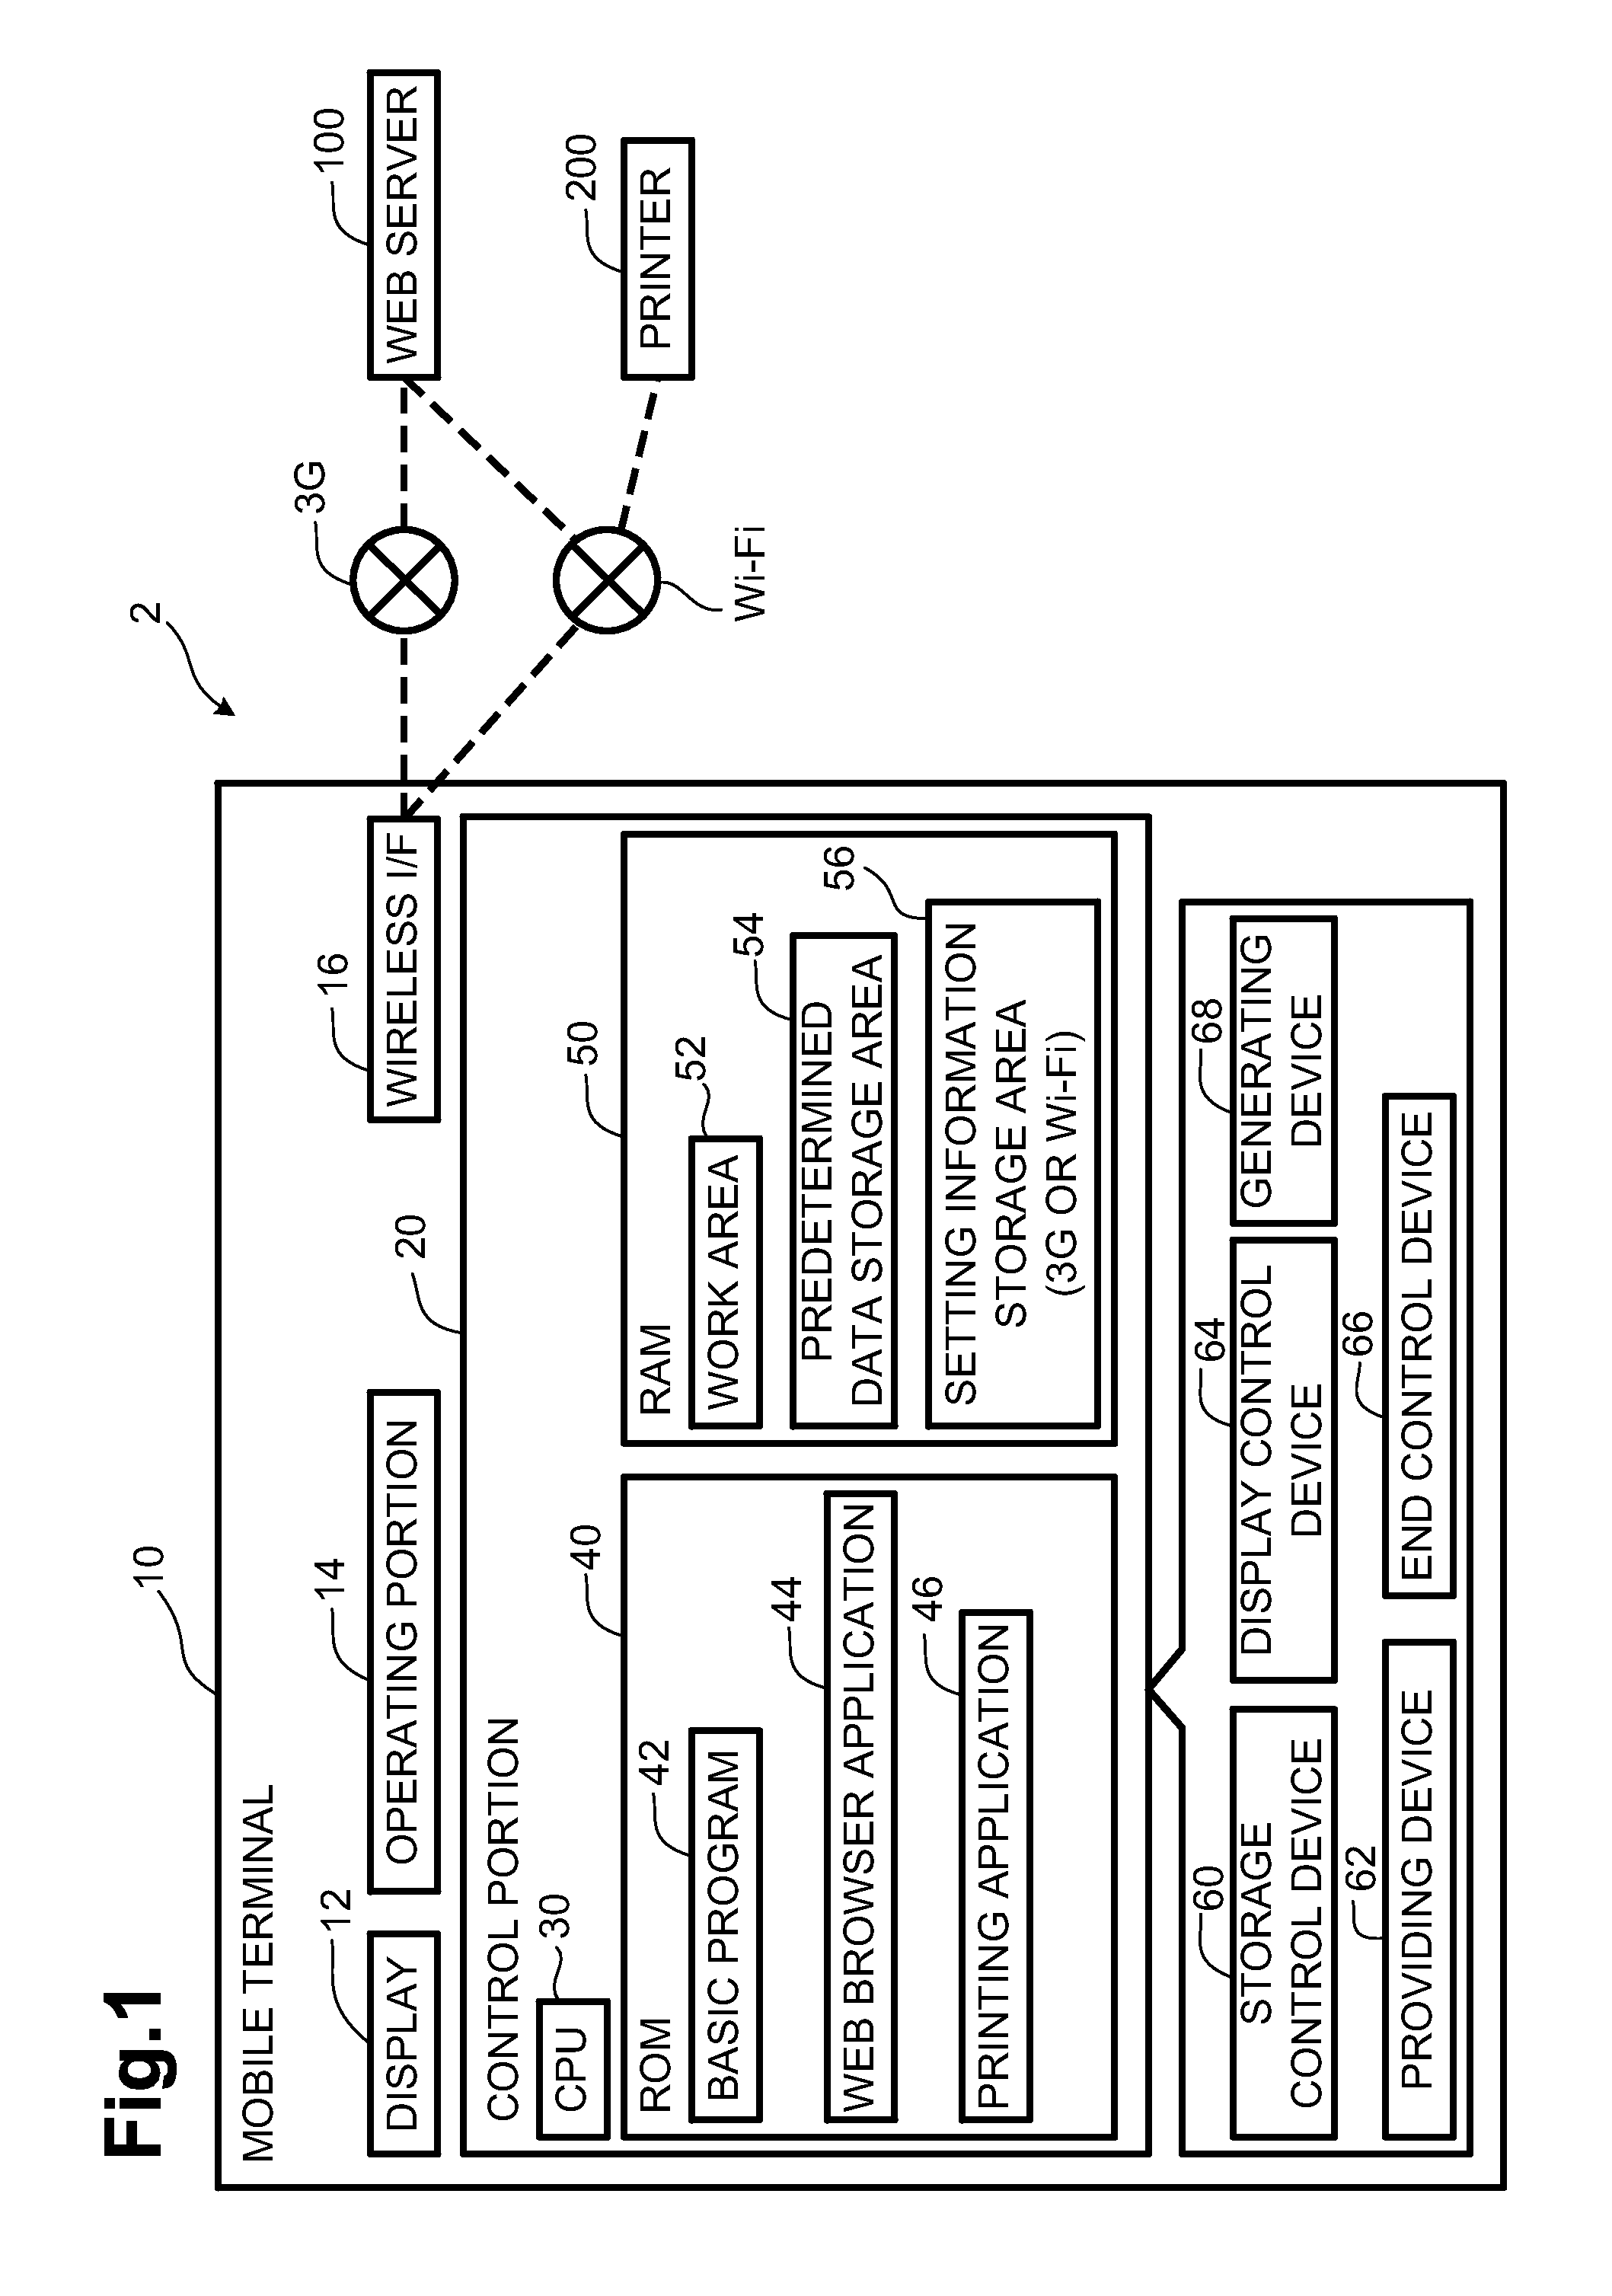 Terminal devices selectively using communication systems, methods of controlling such terminal devices, and media storing computer-readable instructions for such terminal devices